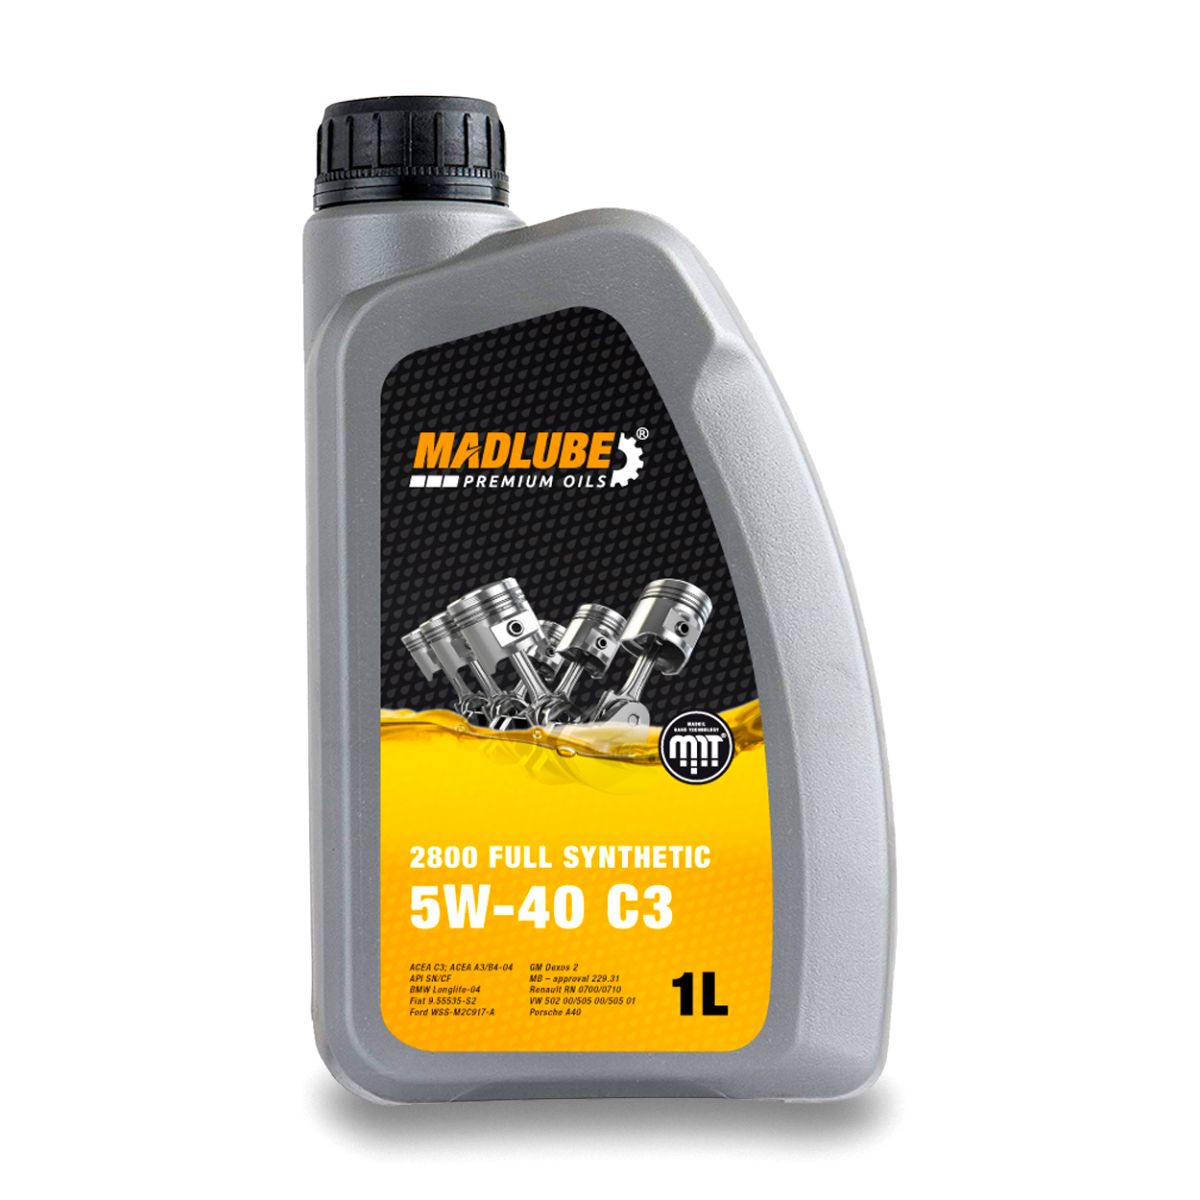 MadLube 2800 Full Synthetic 5W40 C3, 1L